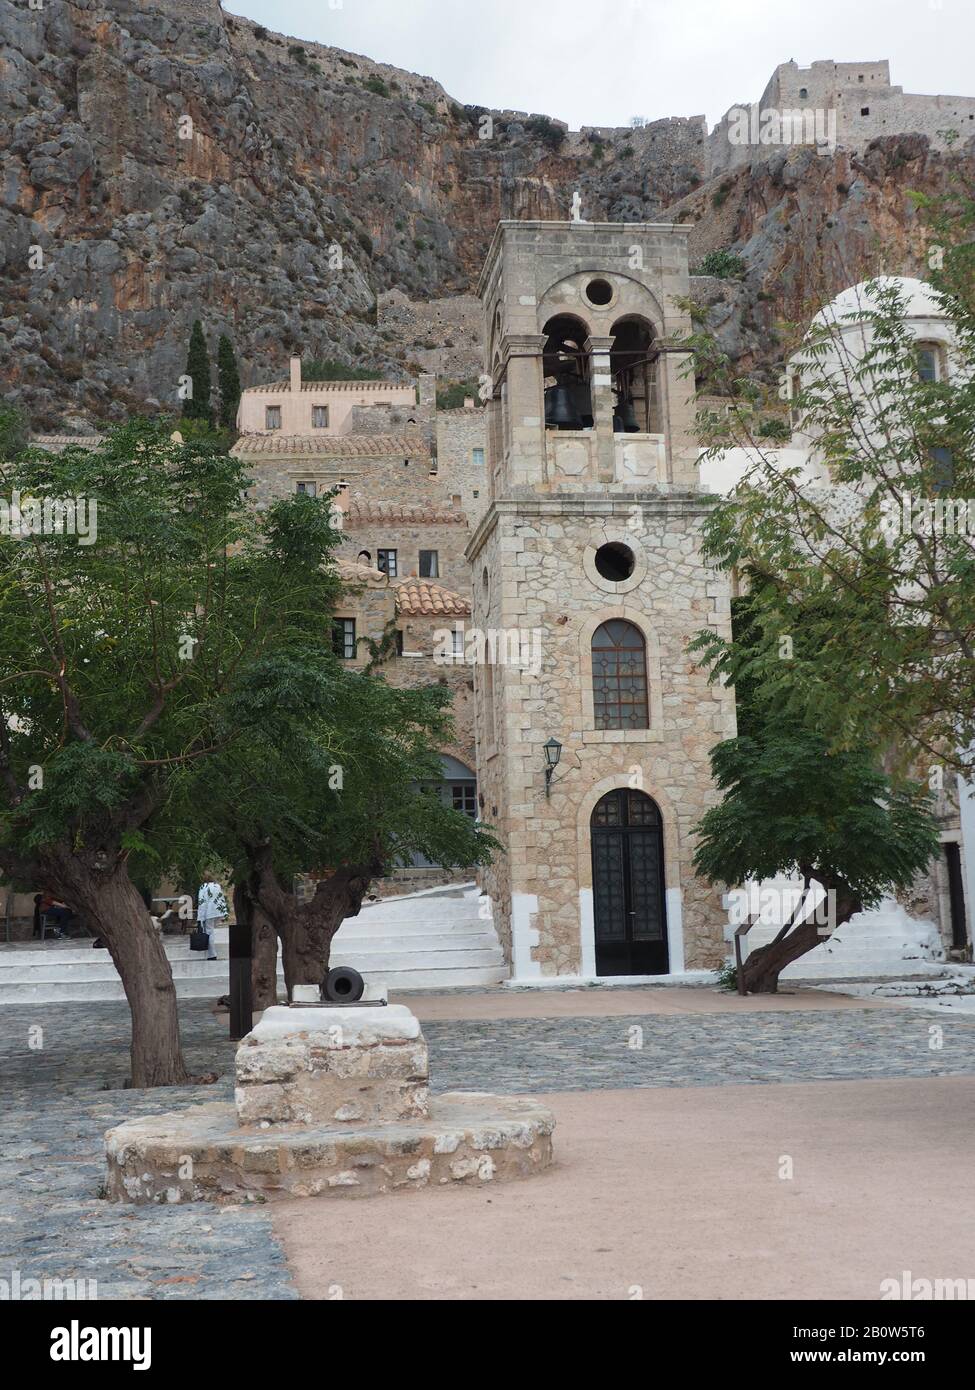 Elkomenos Christos church tower in the central square of walled, island city of Monemvasia, Laconia, Peloponnese, Greece. Ruins on the hill behind. Stock Photo